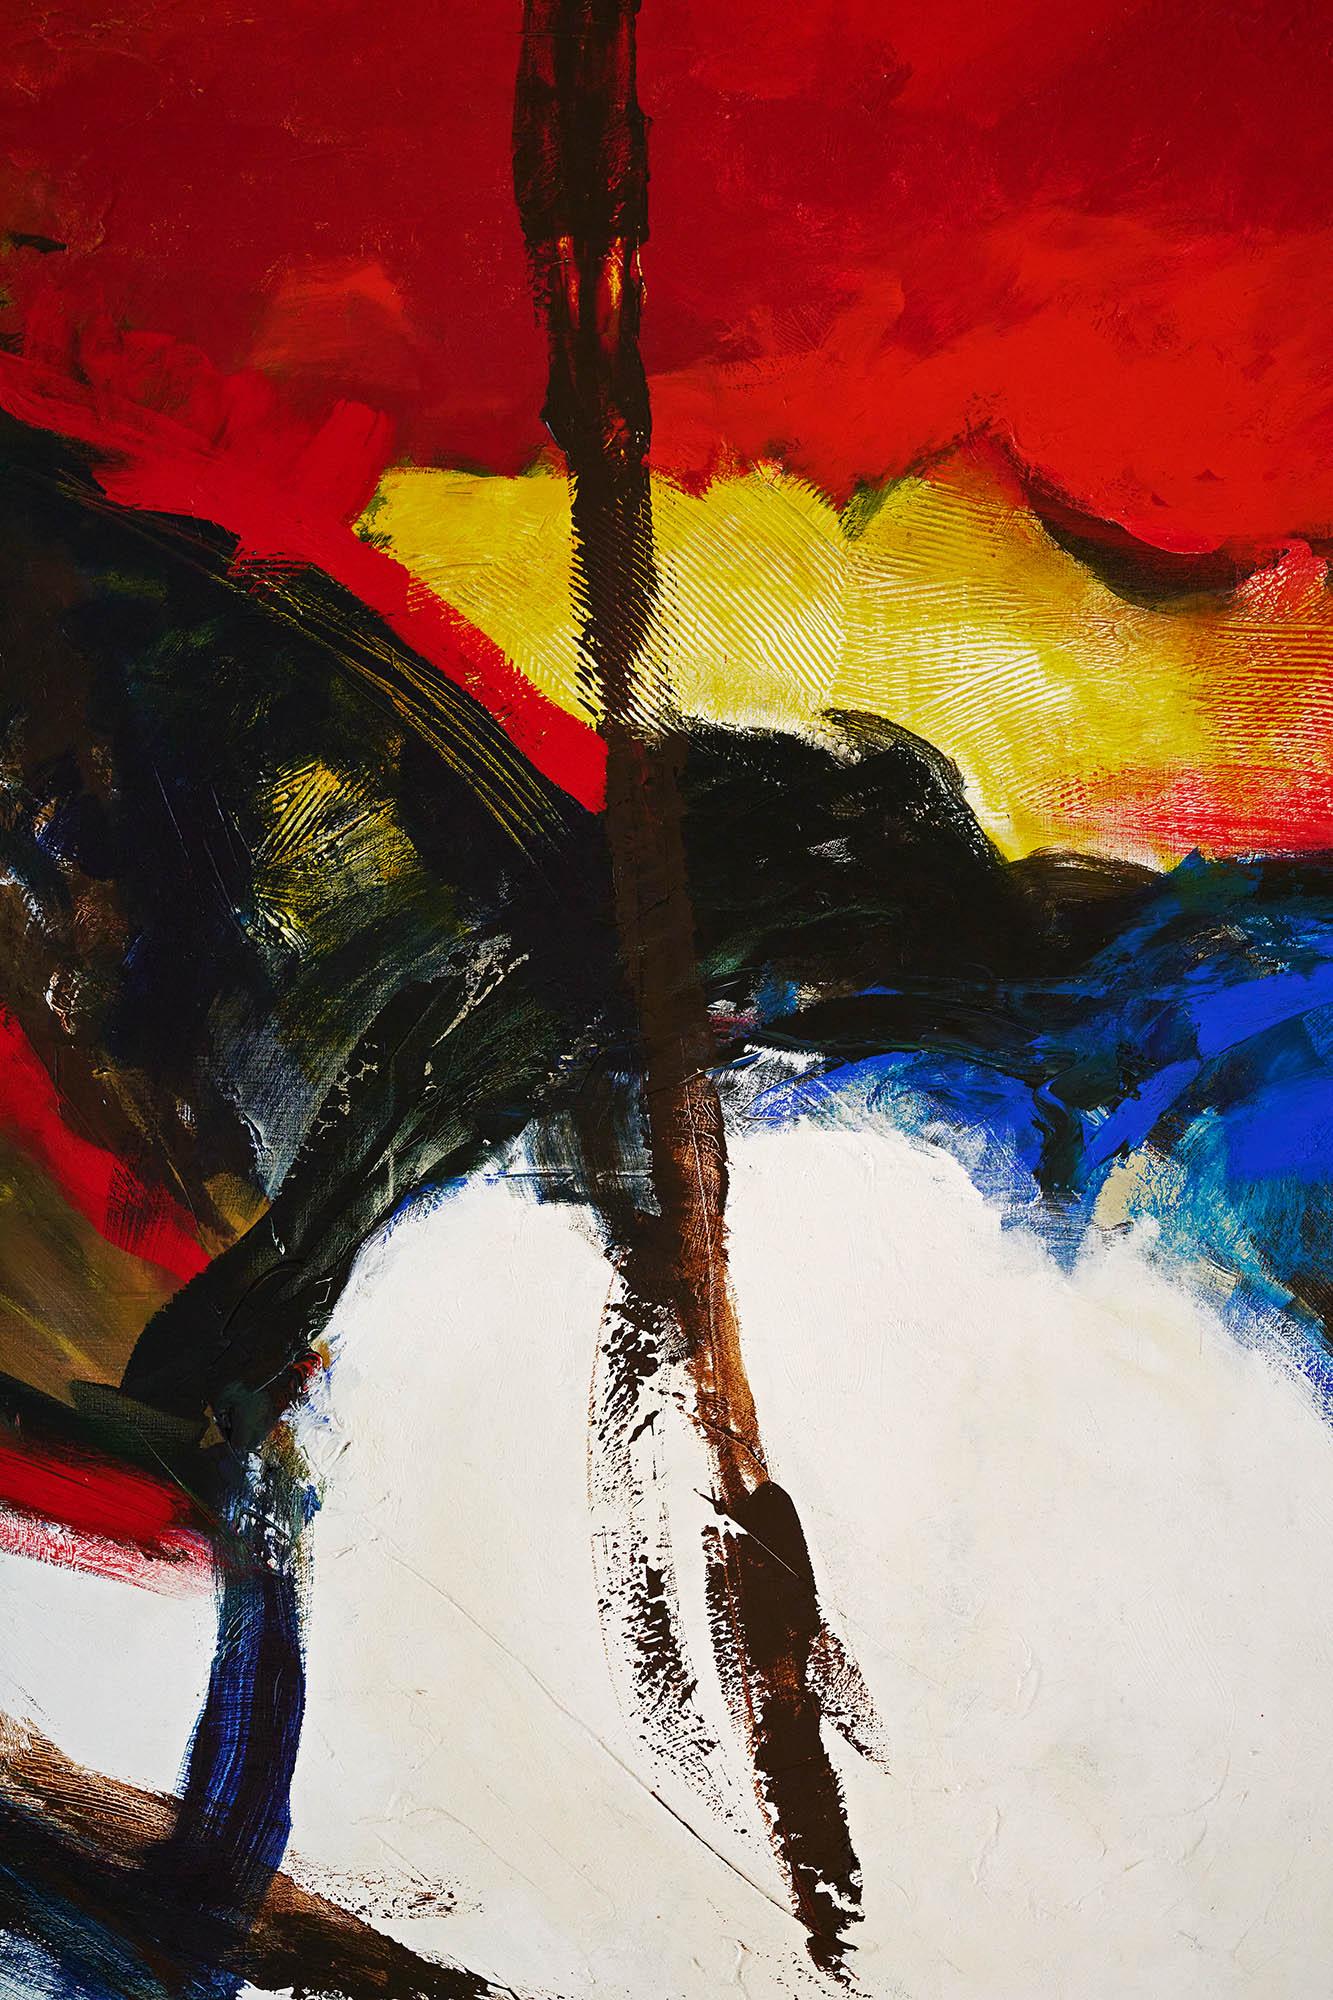 This oversized acrylic on canvas is by French artist Pascal Magis. Known for his use of color, this would add flare to any interior. Dominant colors are red, black, yellow and blue. Dramatic shapes and strokes overwhelm the canvas with dancing